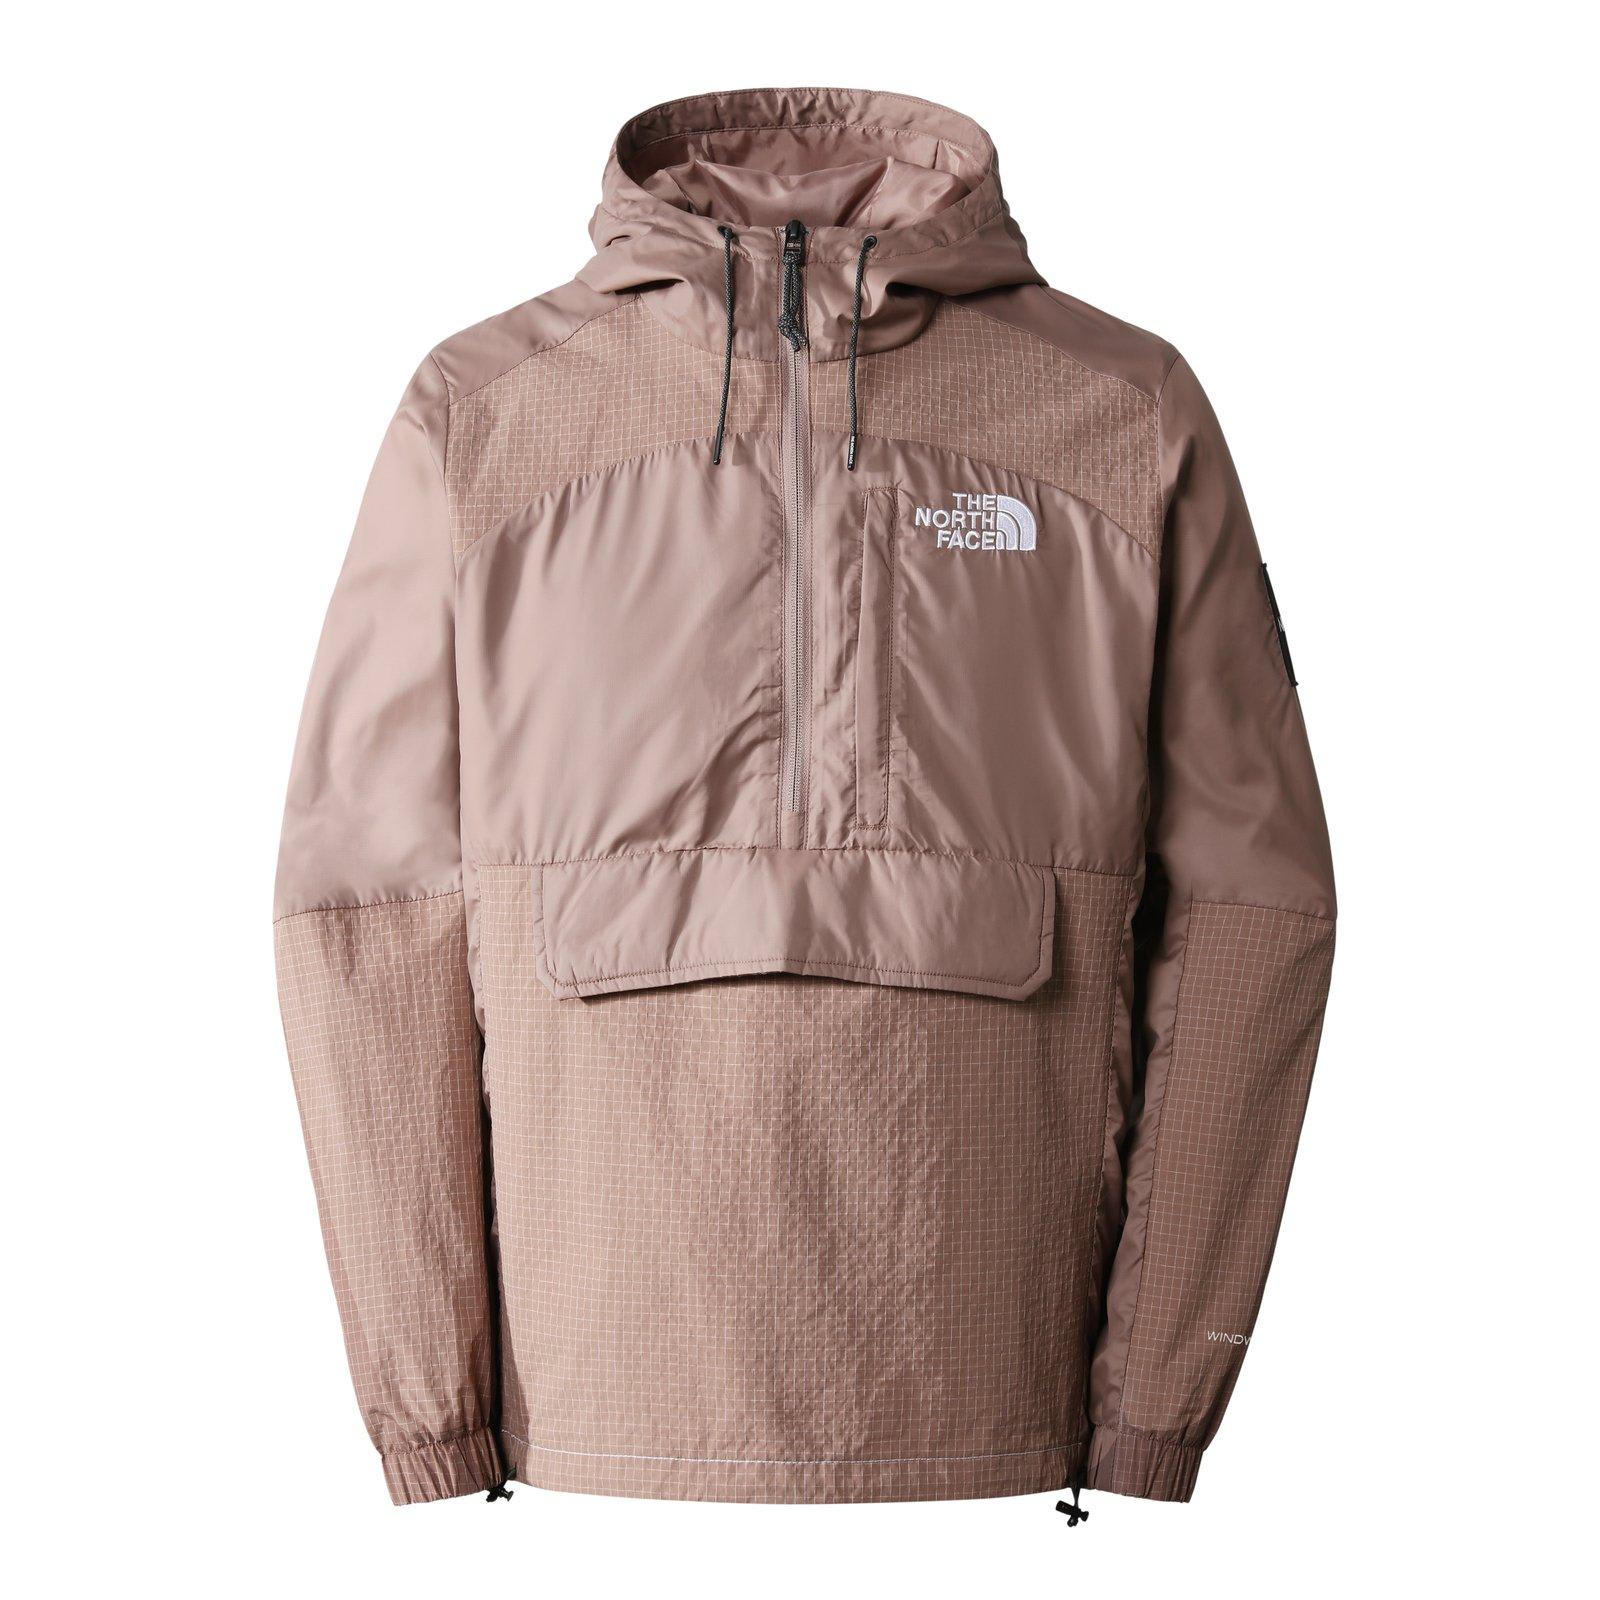 The North Face Logo Patch Zip-up Hoodie